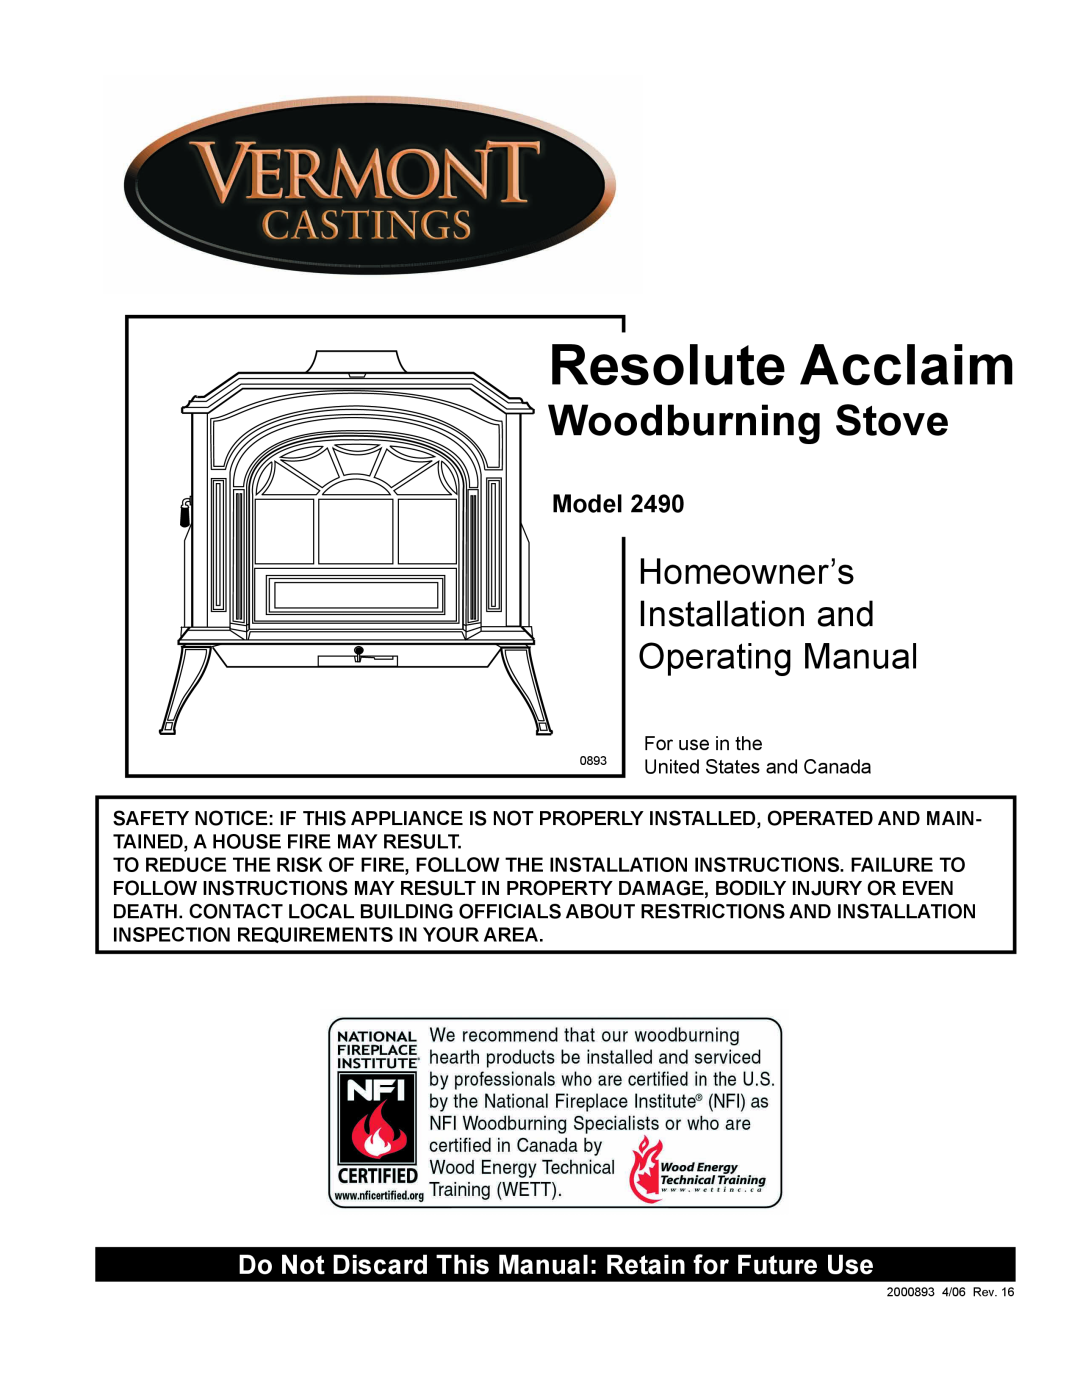 Vermont Casting 2490 installation instructions Woodburning Stove, Model, Resolute Acclaim, Homeowner’s, Installation and 